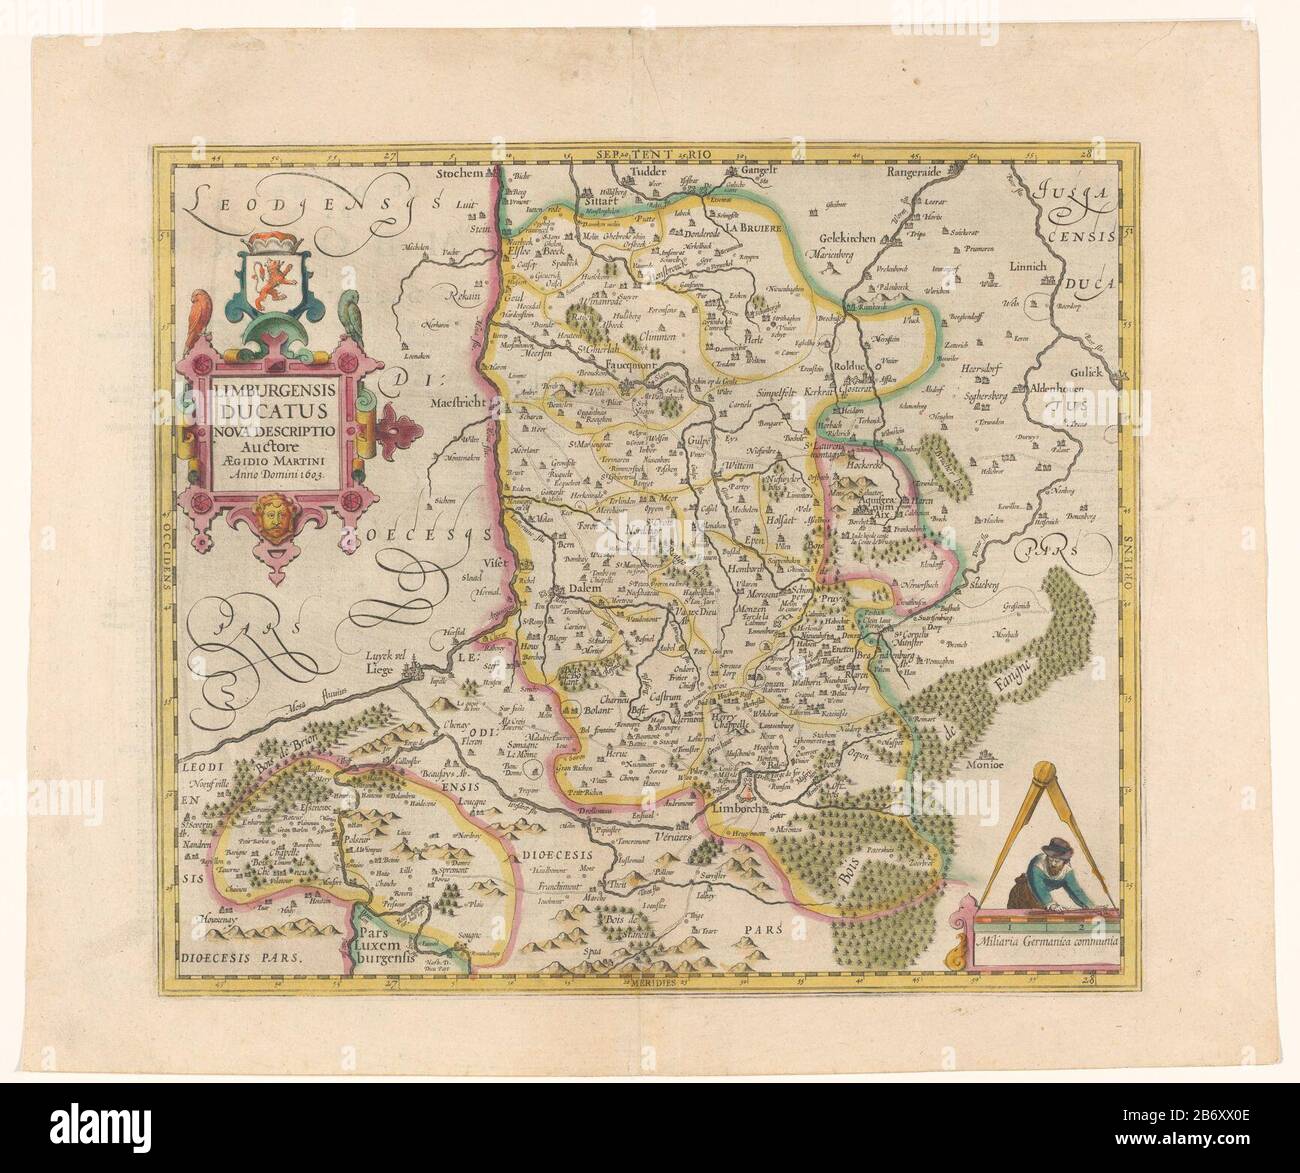 Kaart van het hertogdom Limburg Limburgensis ducatus nova descriptio (titel op object) Map of the Duchy of Limburg. Above left the title cartouche above the arms of the Duchy of Limburg. Right a cartouche with scale bar: 2 Miliaria Germanica COMMUNIA. The card is provided with a degree scale along the edges. On verso French tekst. Manufacturer : printmaker: anonymous cartographer: Aegidius Martini (first half 17th century) (listed building) Publisher: Henricus Hondius Place manufacture: Amsterdam Date: 1628 - 1633 Physical features: engra, hand-colored; with text in the letterpress on verso ma Stock Photo